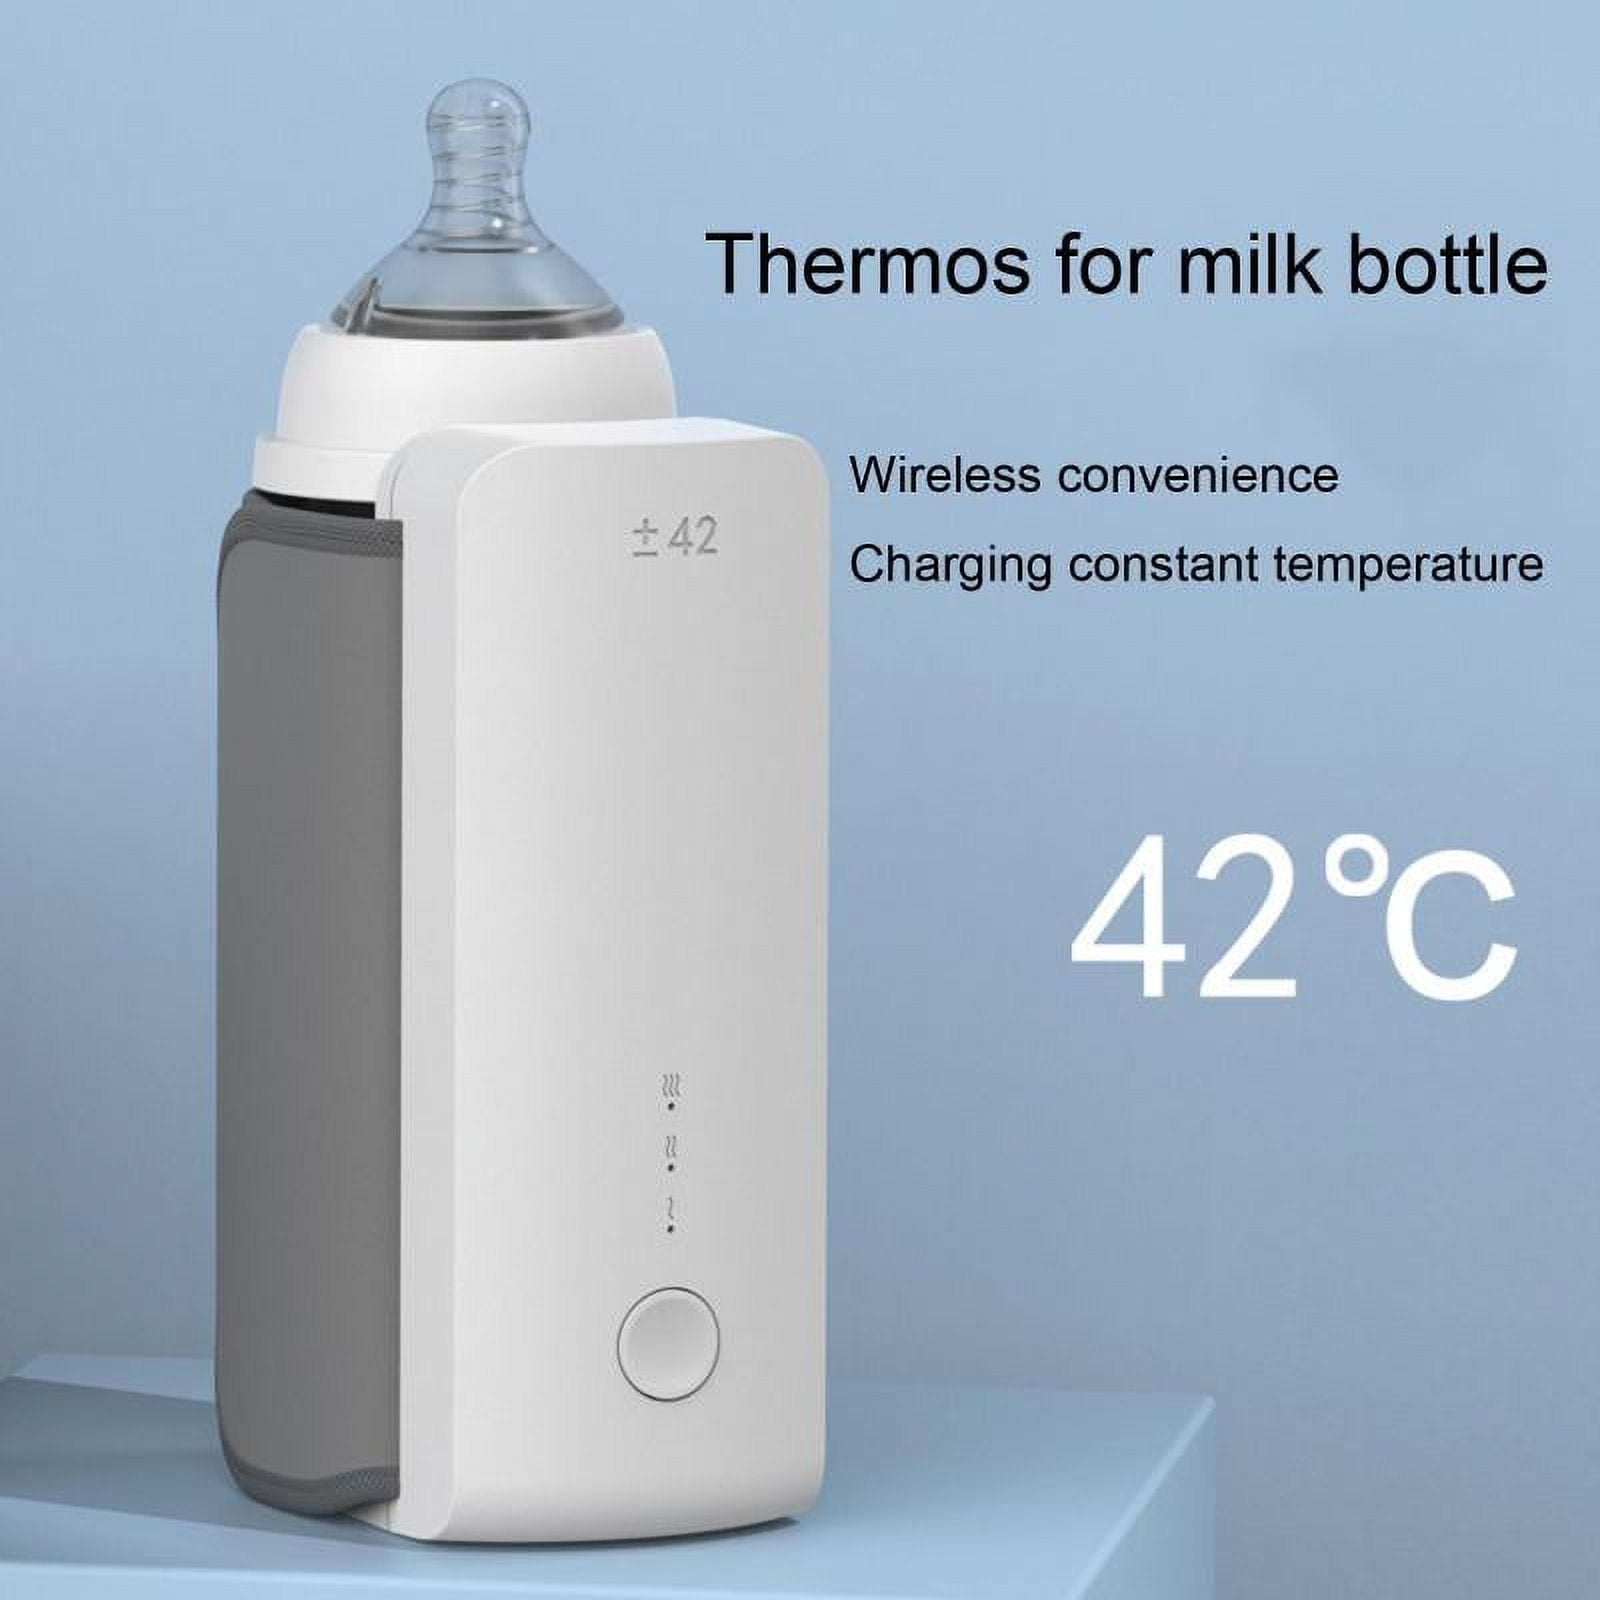 BOLOLO portable milk warmer with super fast charging